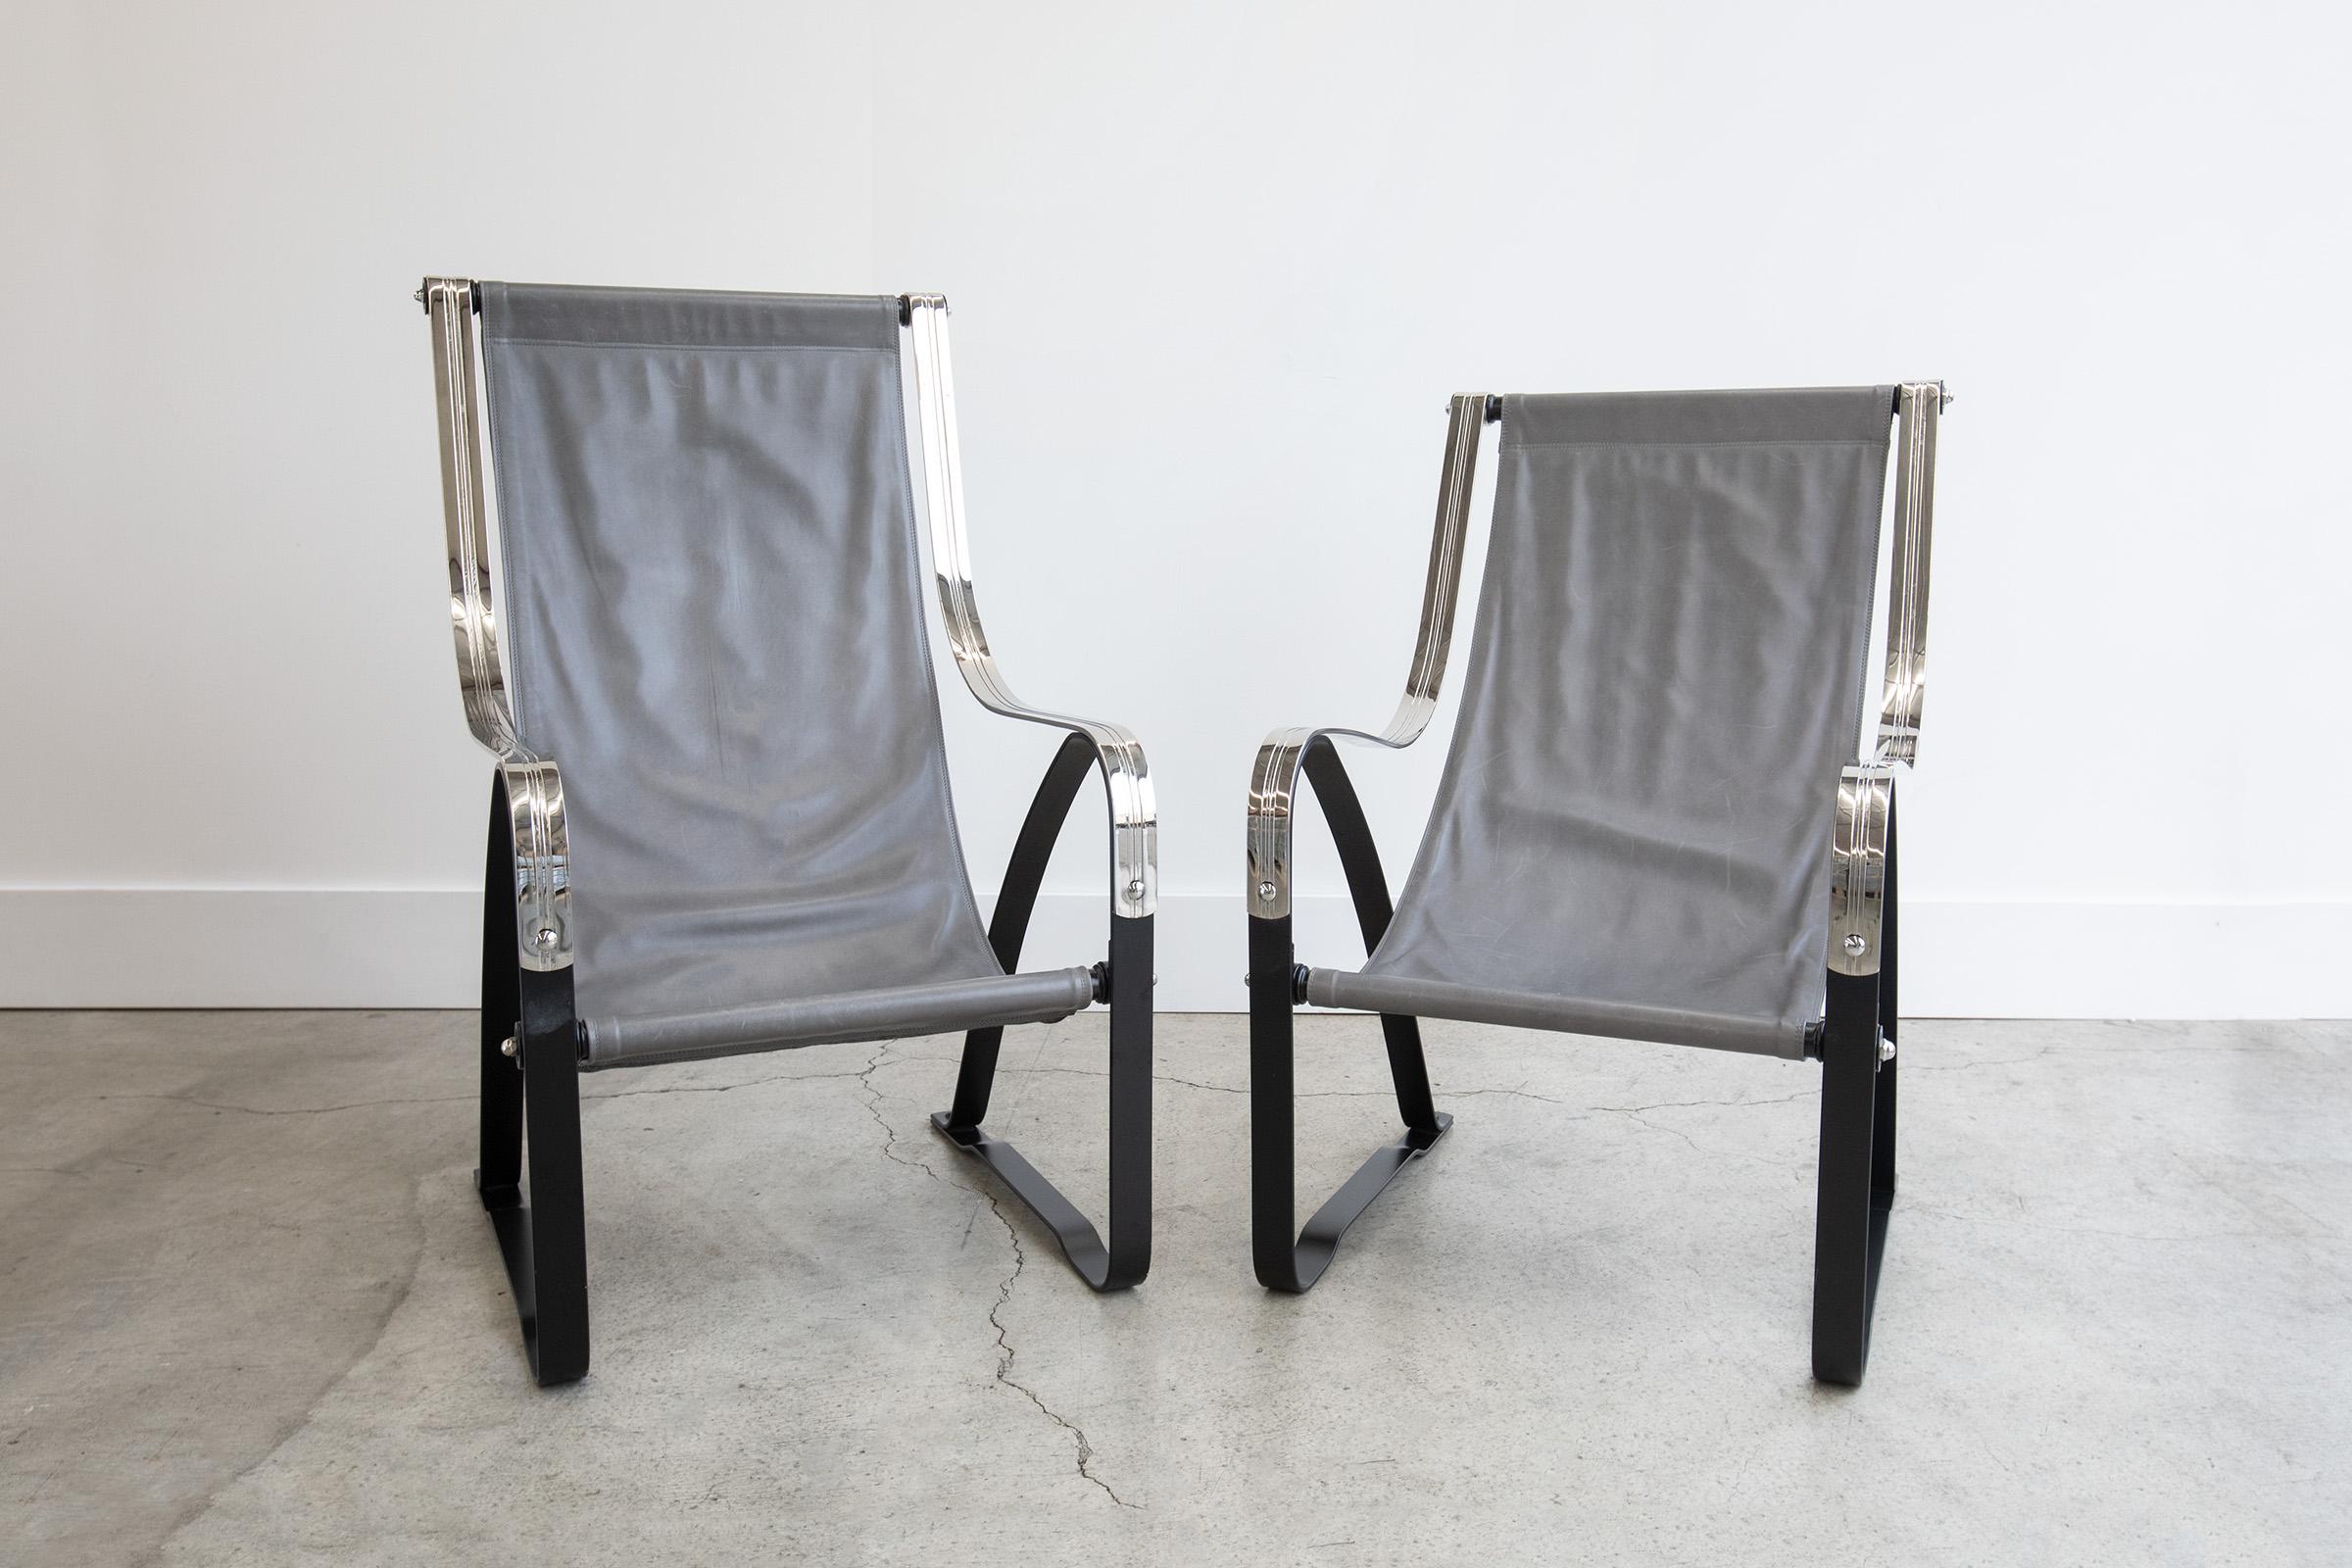 Gorgeous pair of Art Deco, Machine Age leather sling chairs by Salvatore Bevelacqua for McKay Craft Furniture Company. Featuring impressive chromium plated steel arms, iron base, and leather slings. This pair is a 